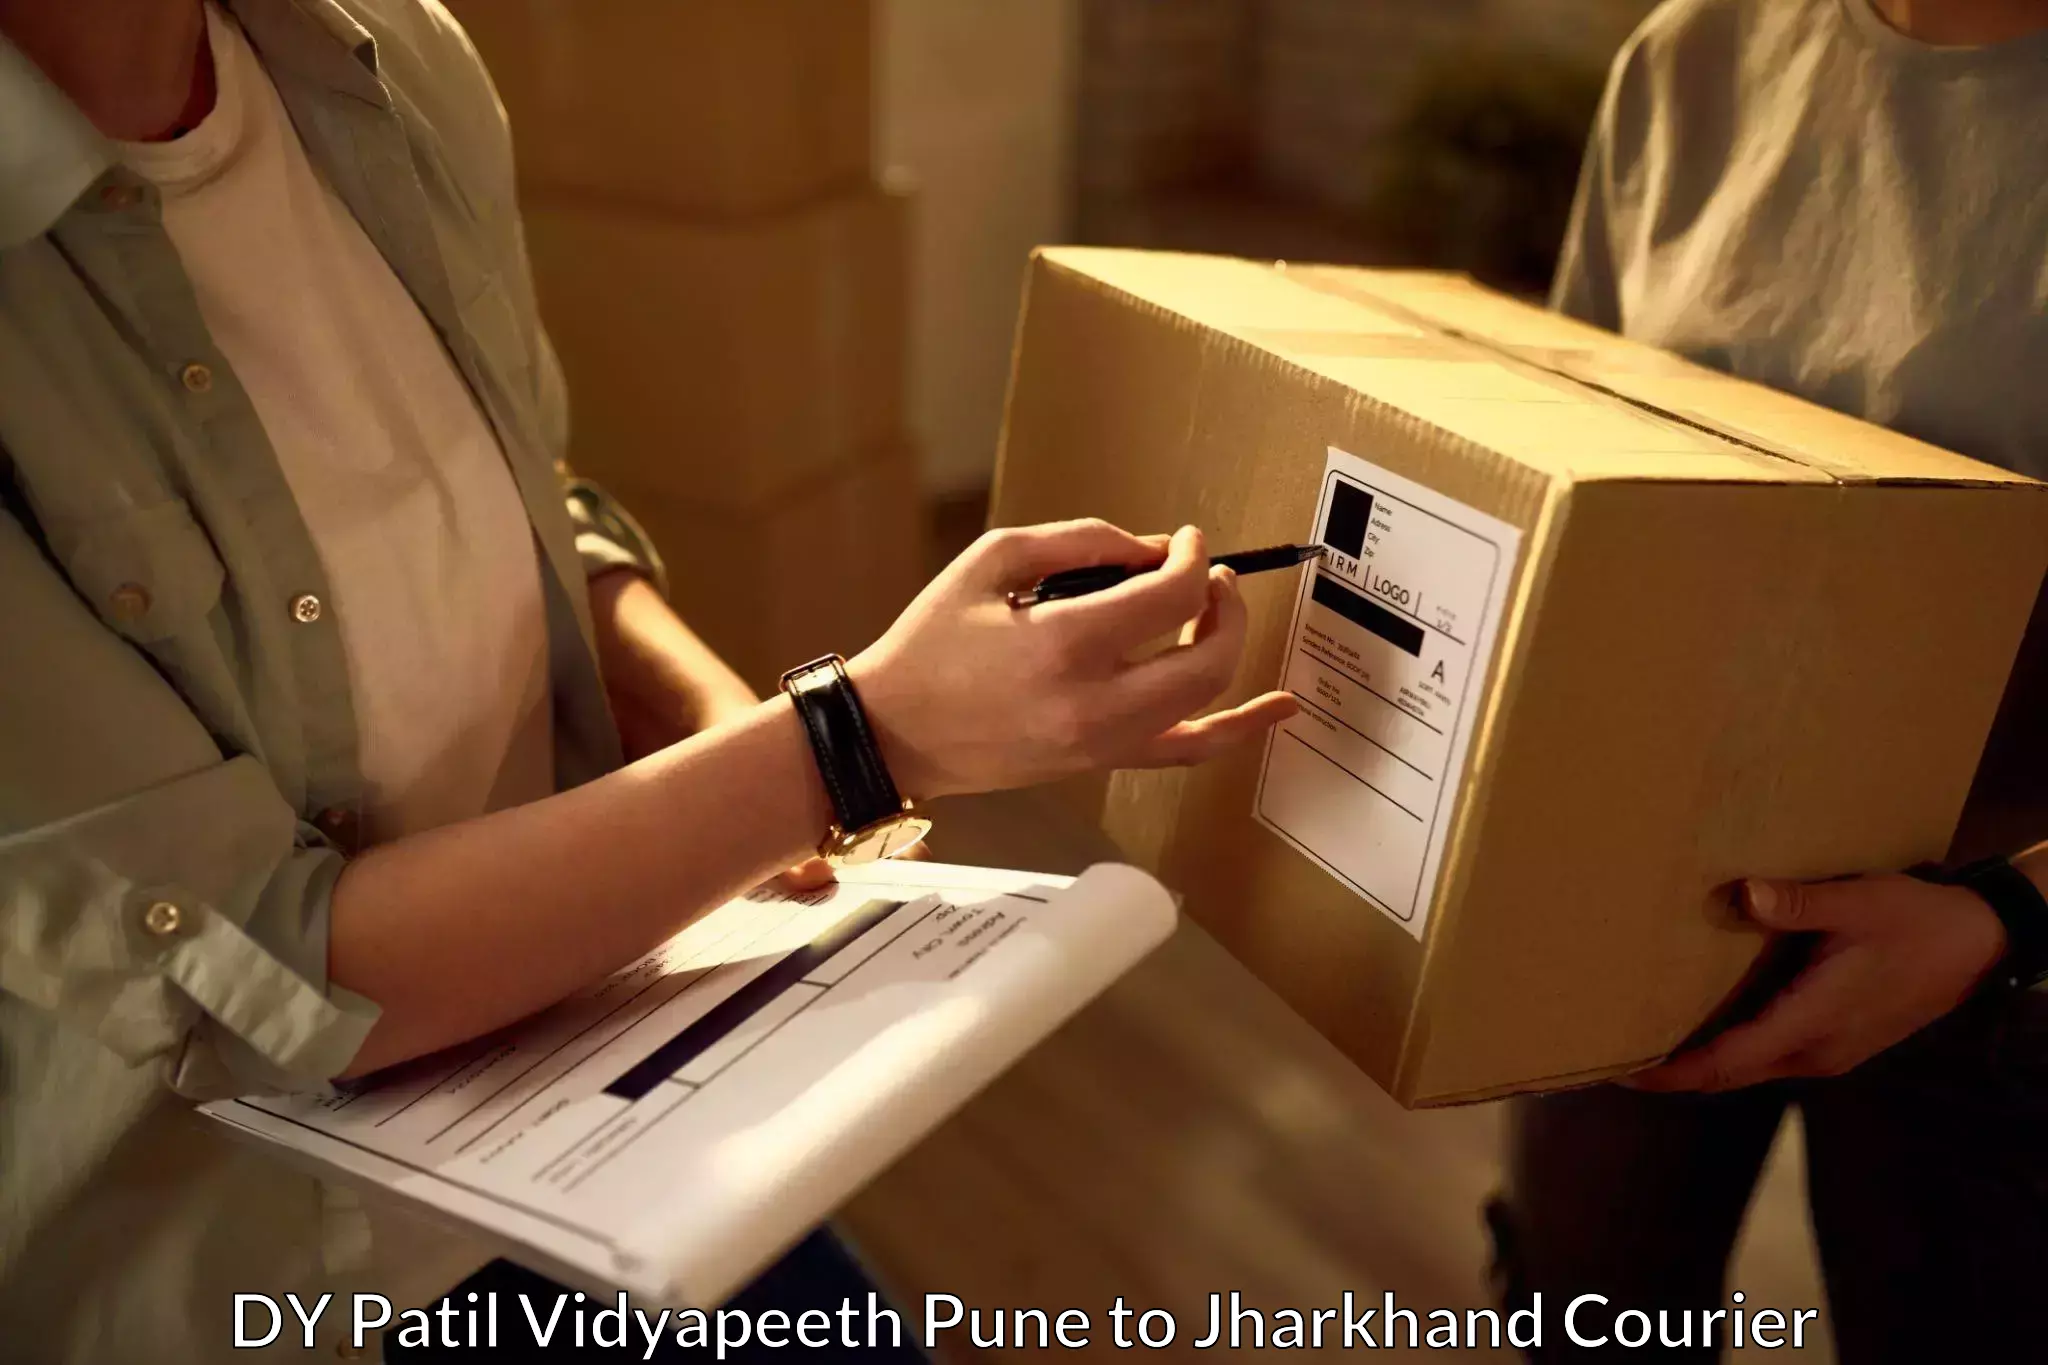 Business shipping needs DY Patil Vidyapeeth Pune to Tamar